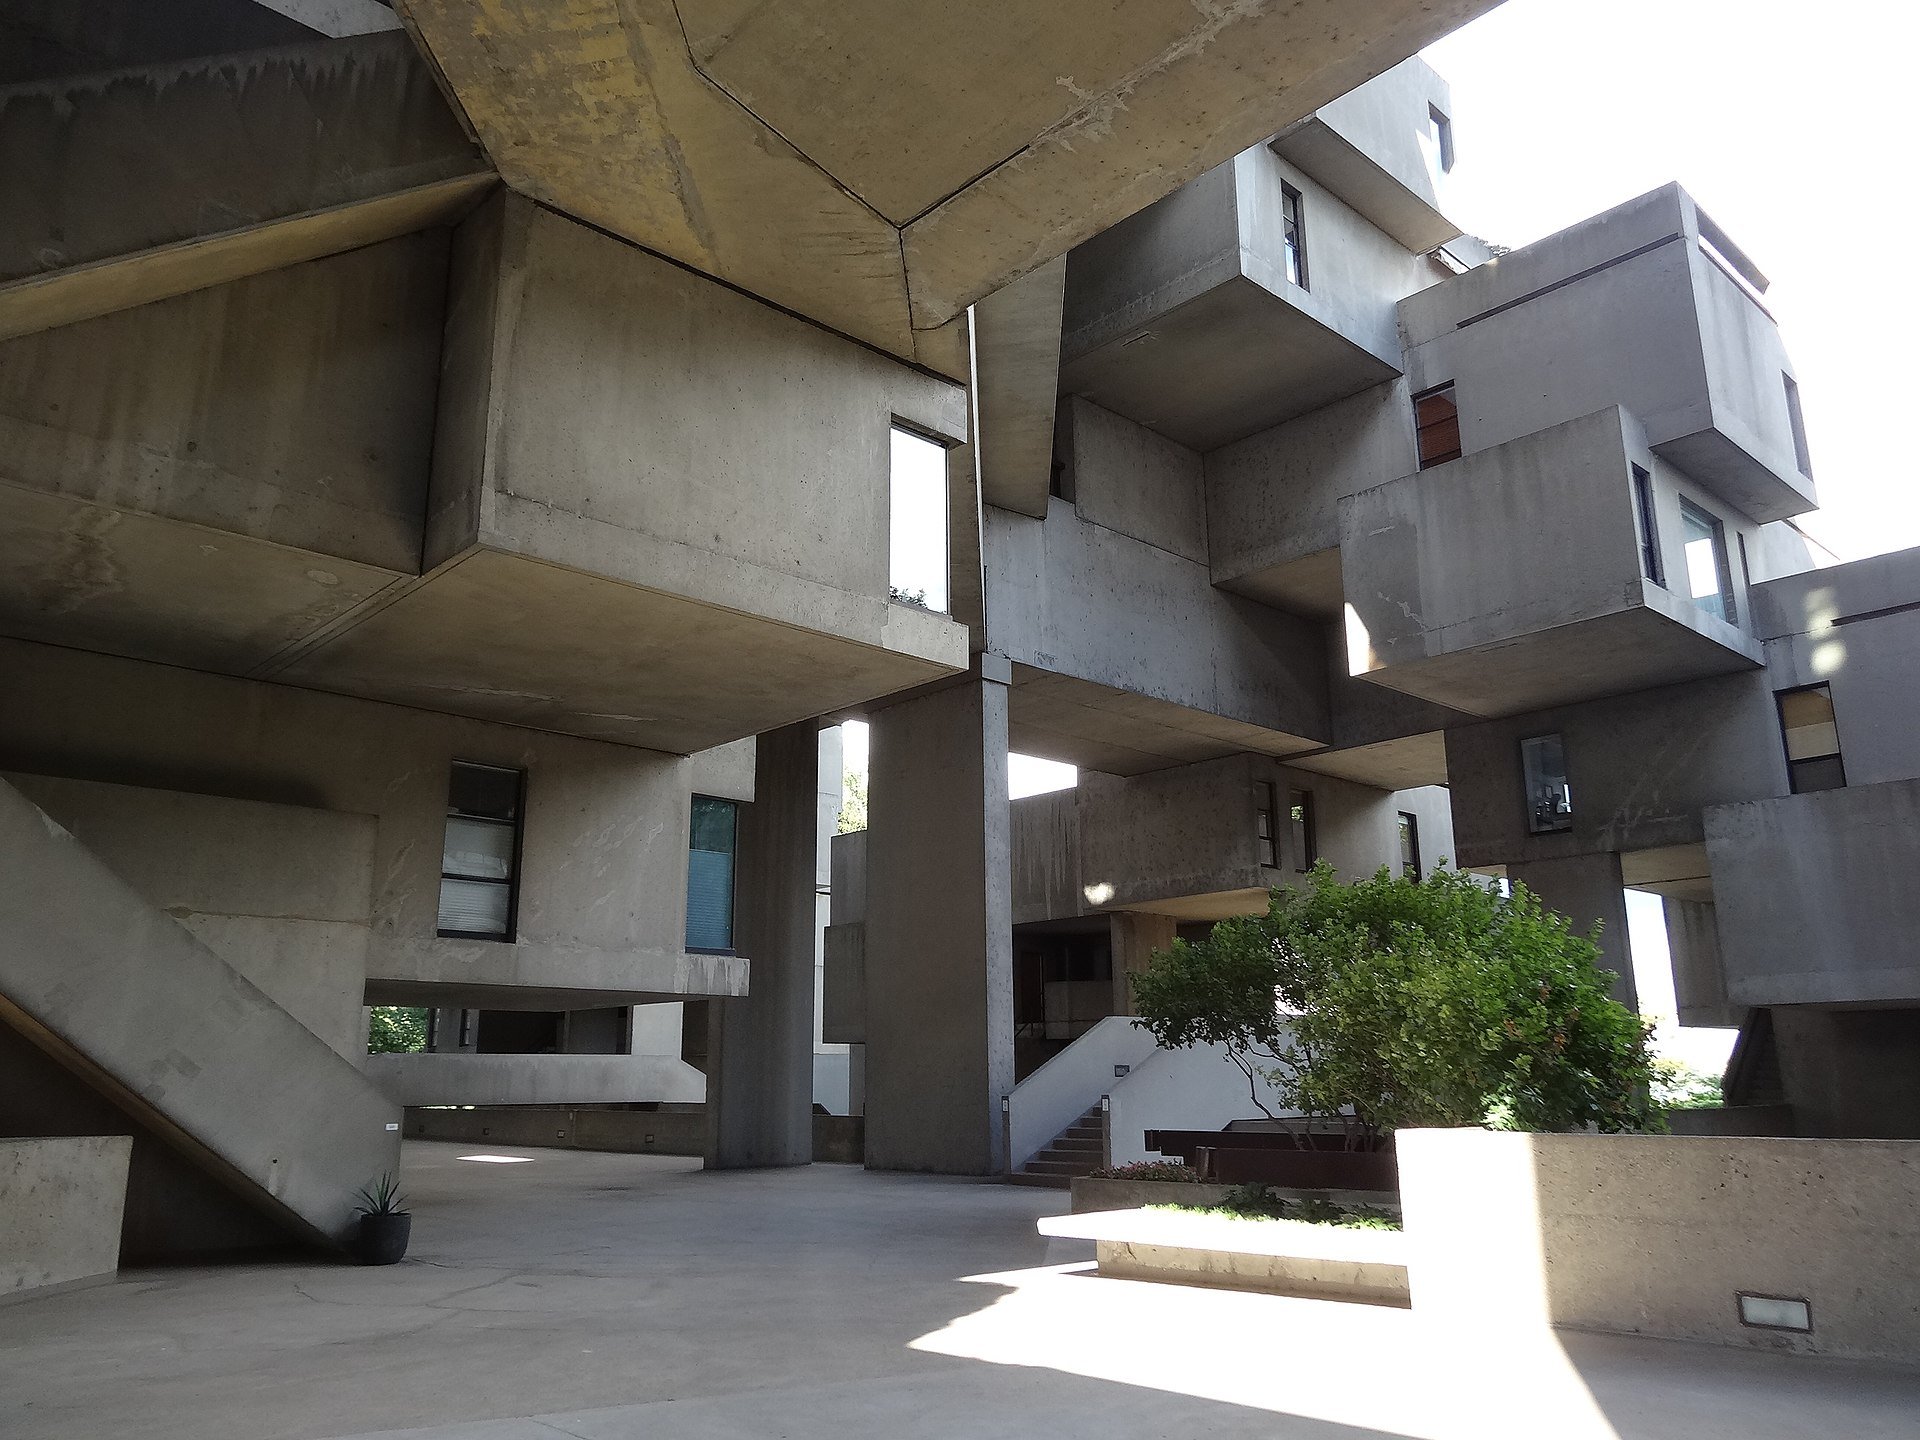 Montréal's Habitat 67 remains one of the world's most recognisable brutalist buildings and is an early example of complex concrete prefabrication. Photography c/o Creative Commons. 